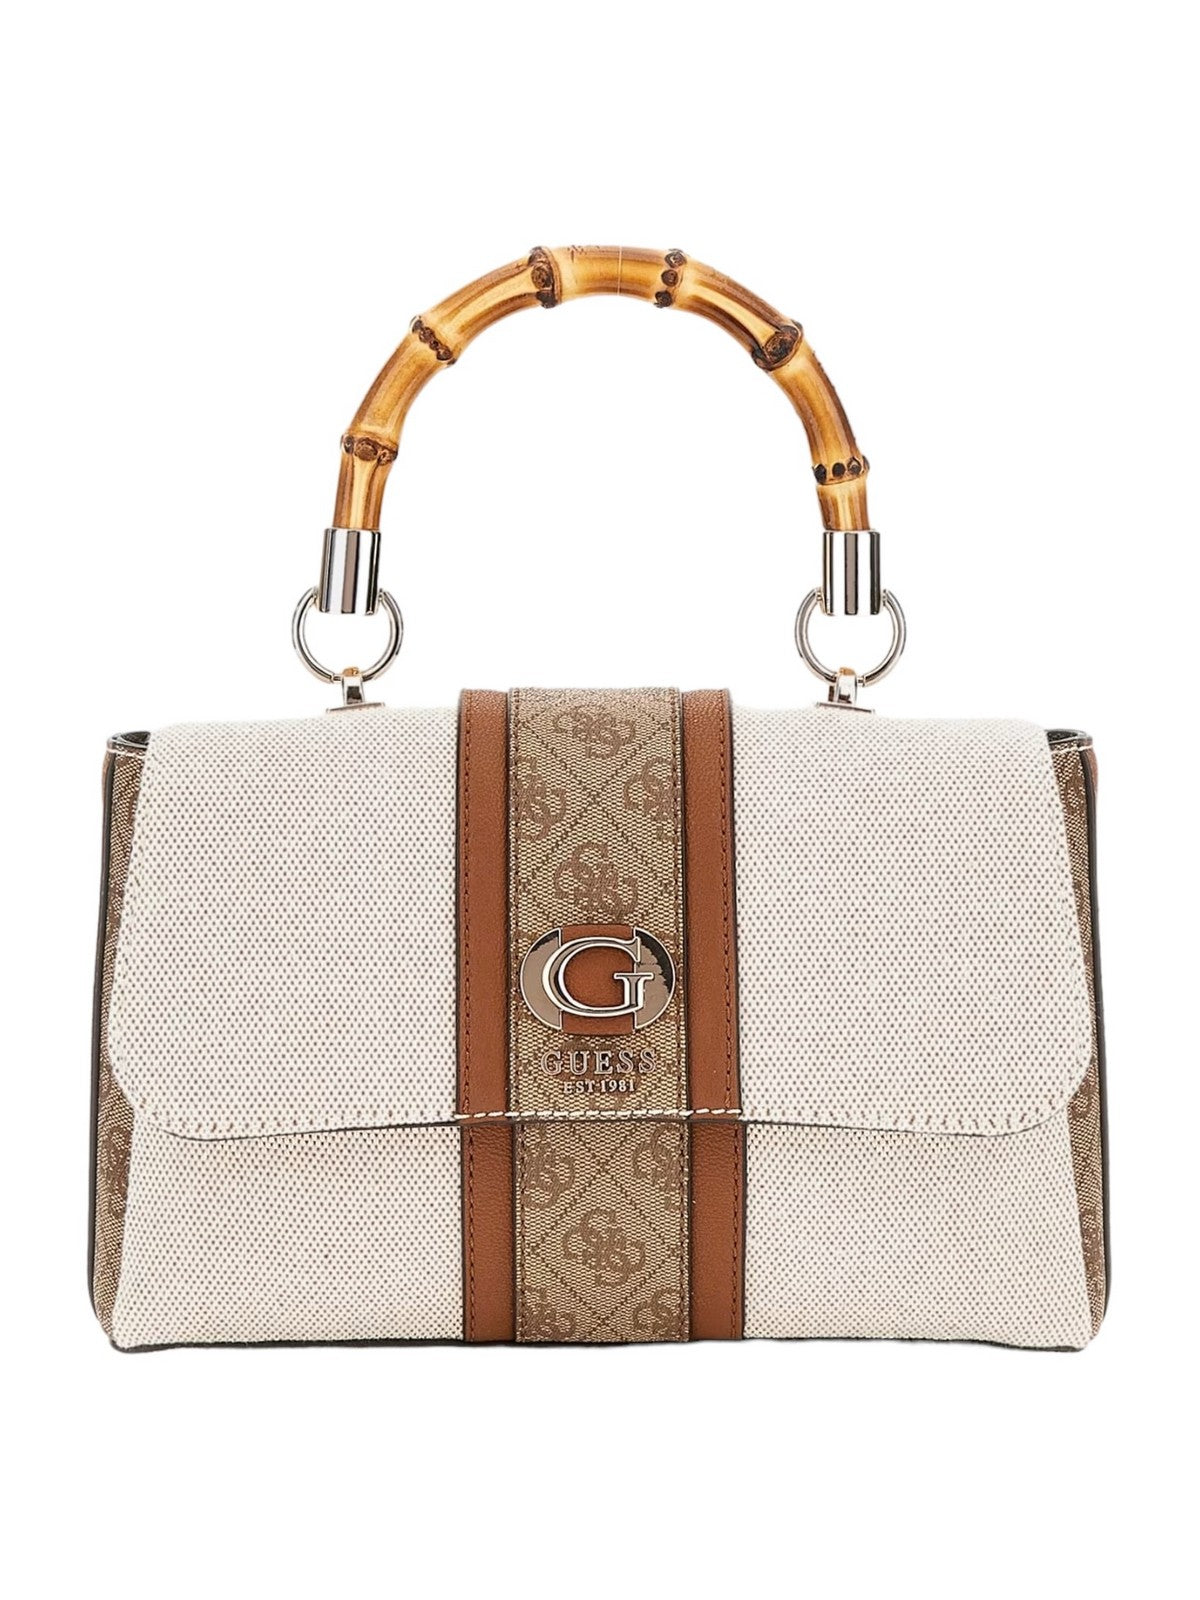 GUESS Canvas Ii Small Tote HWAG93 37200 NLL Marron